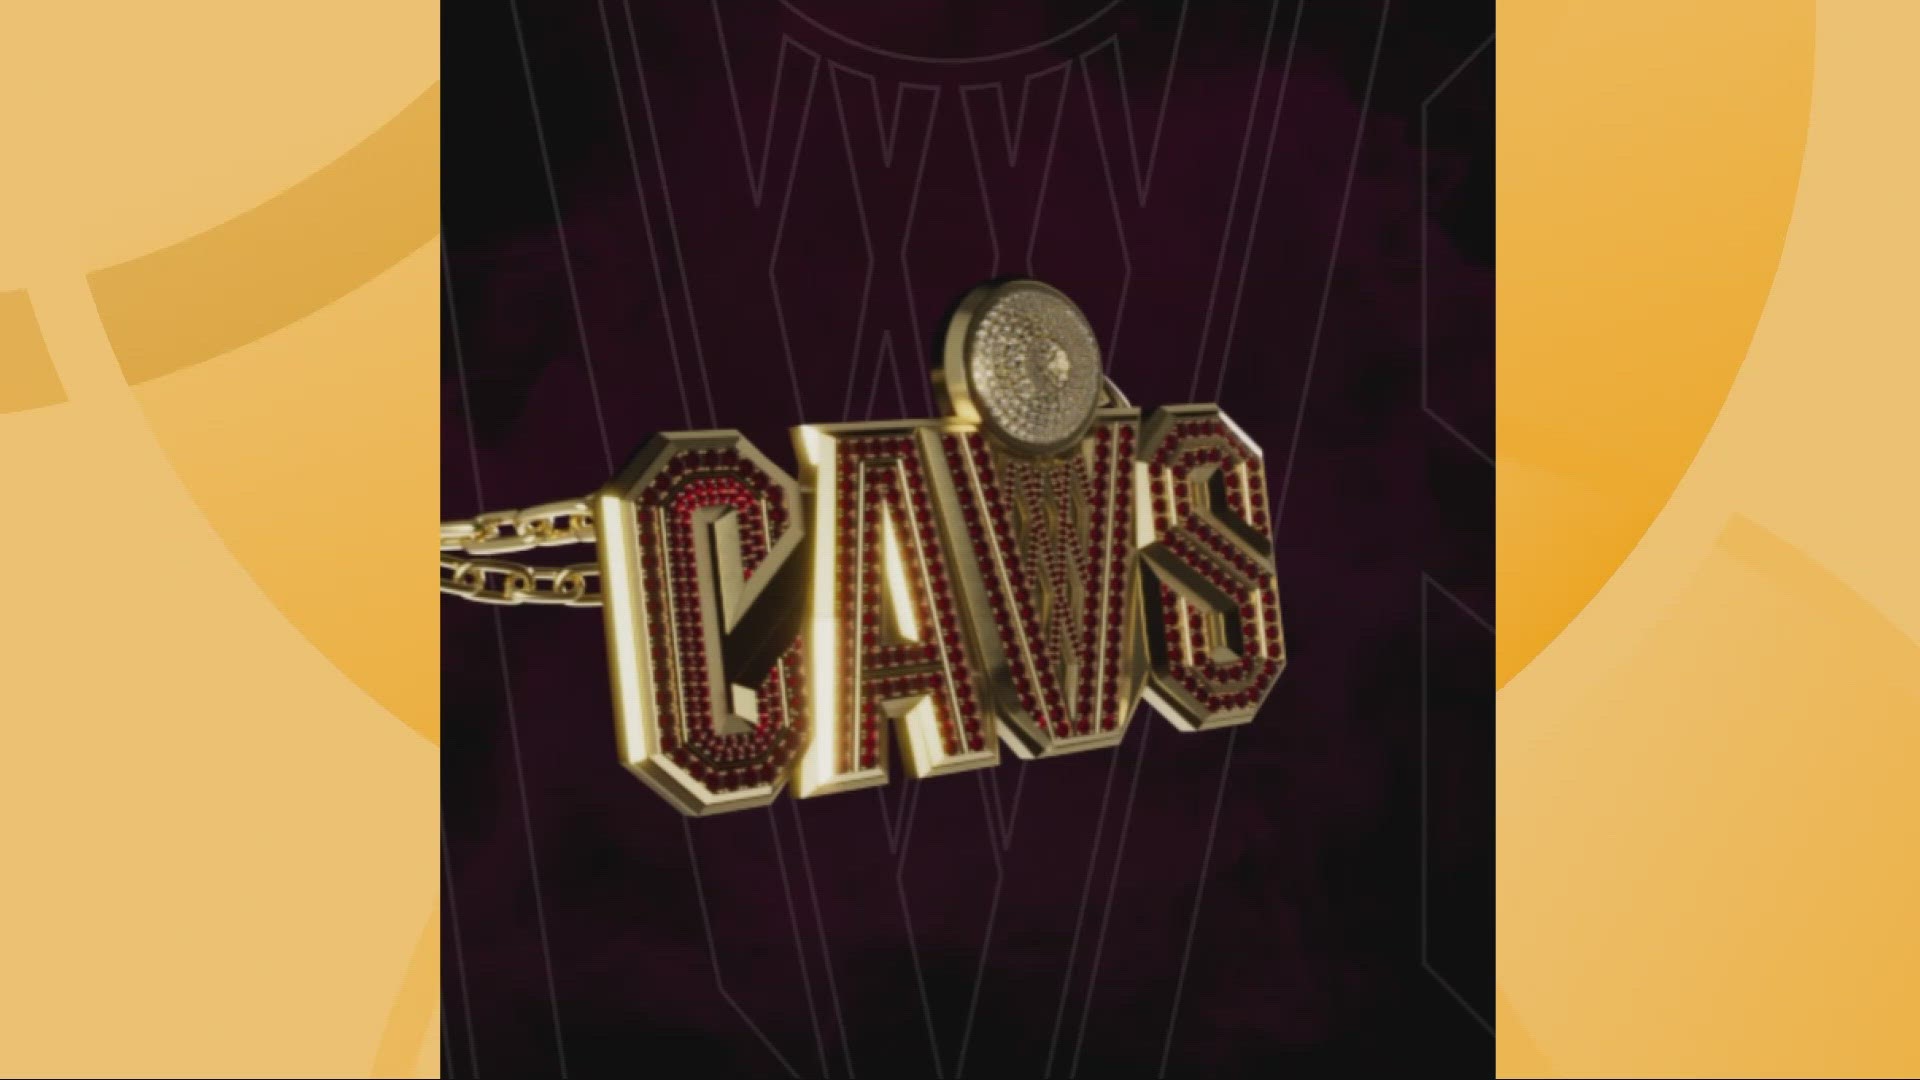 Following their Game 2 win over the New York Knicks, the Cleveland Cavaliers unveiled a new 'Junkyard Dog' chain.